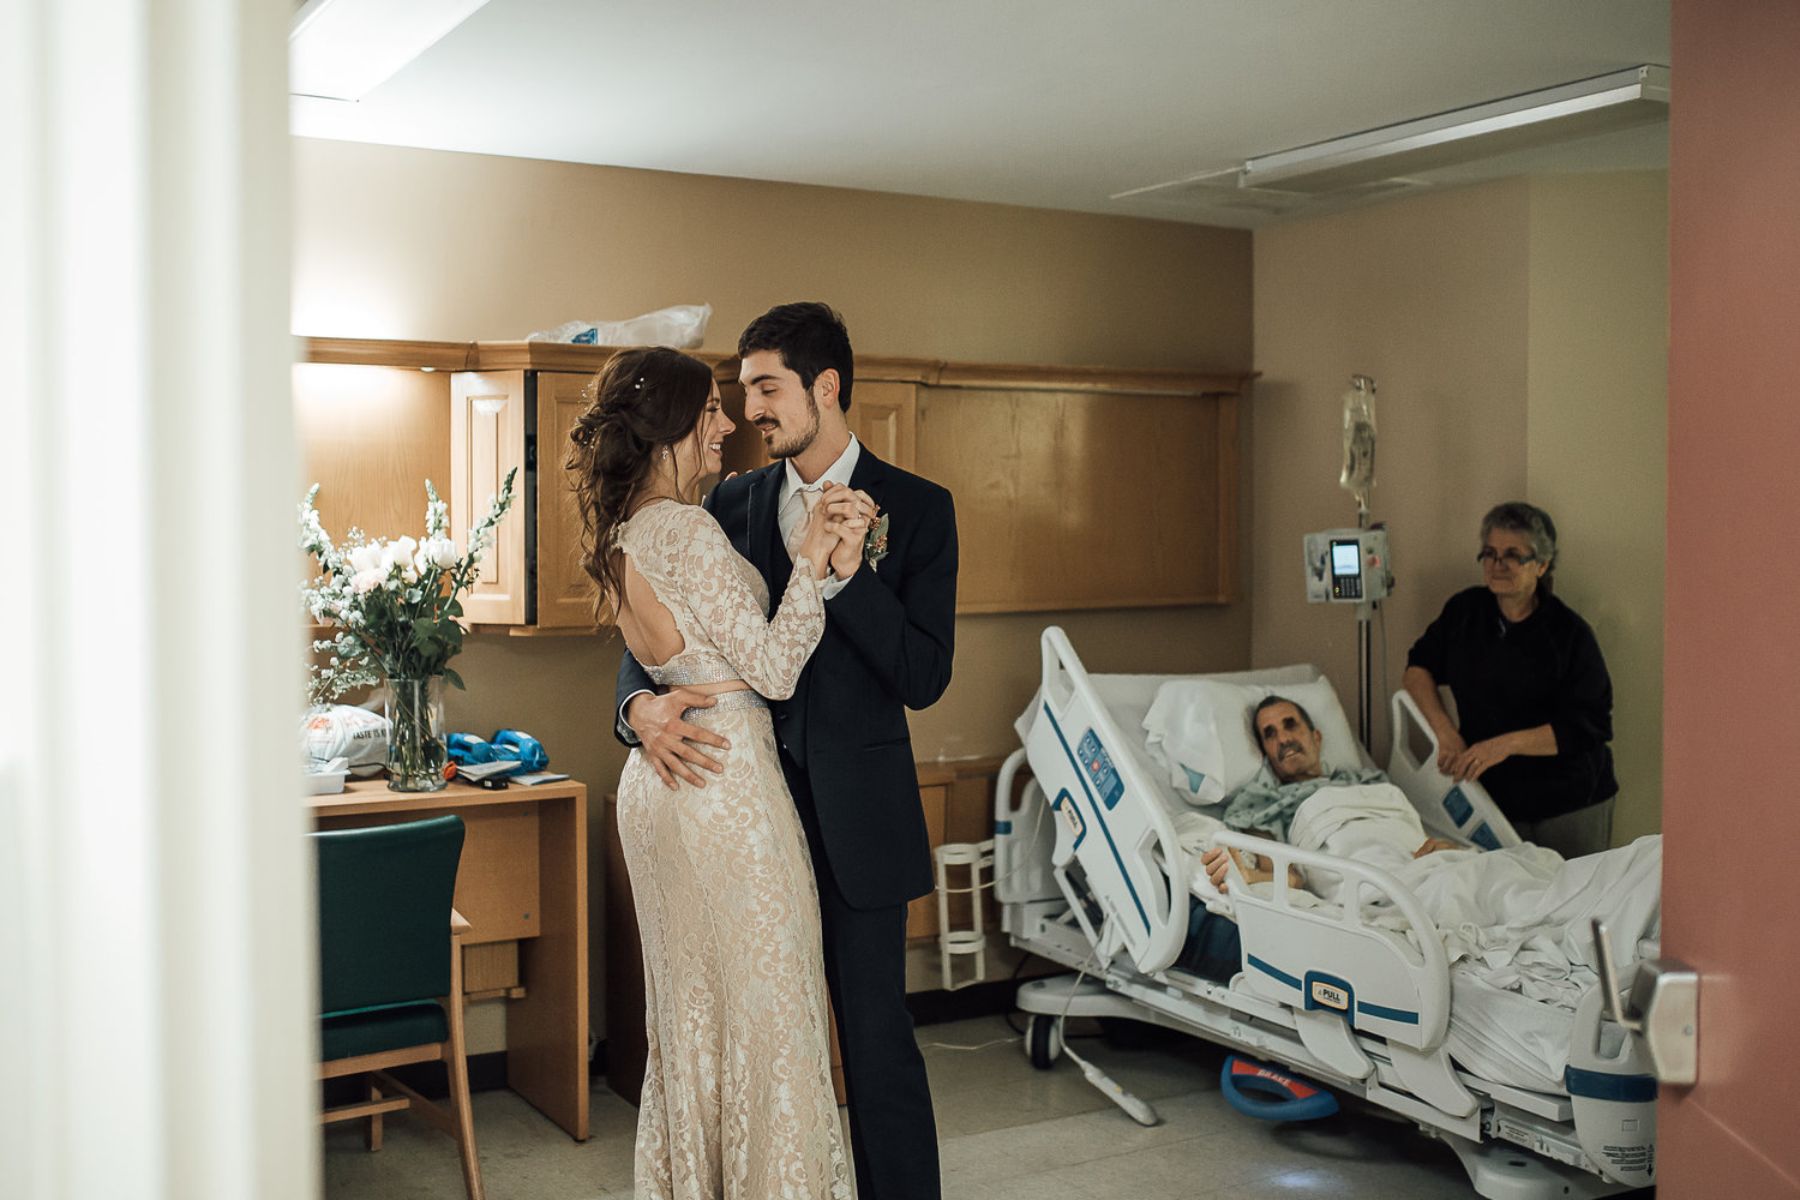 Couple dancing in hospital room while man and woman look on